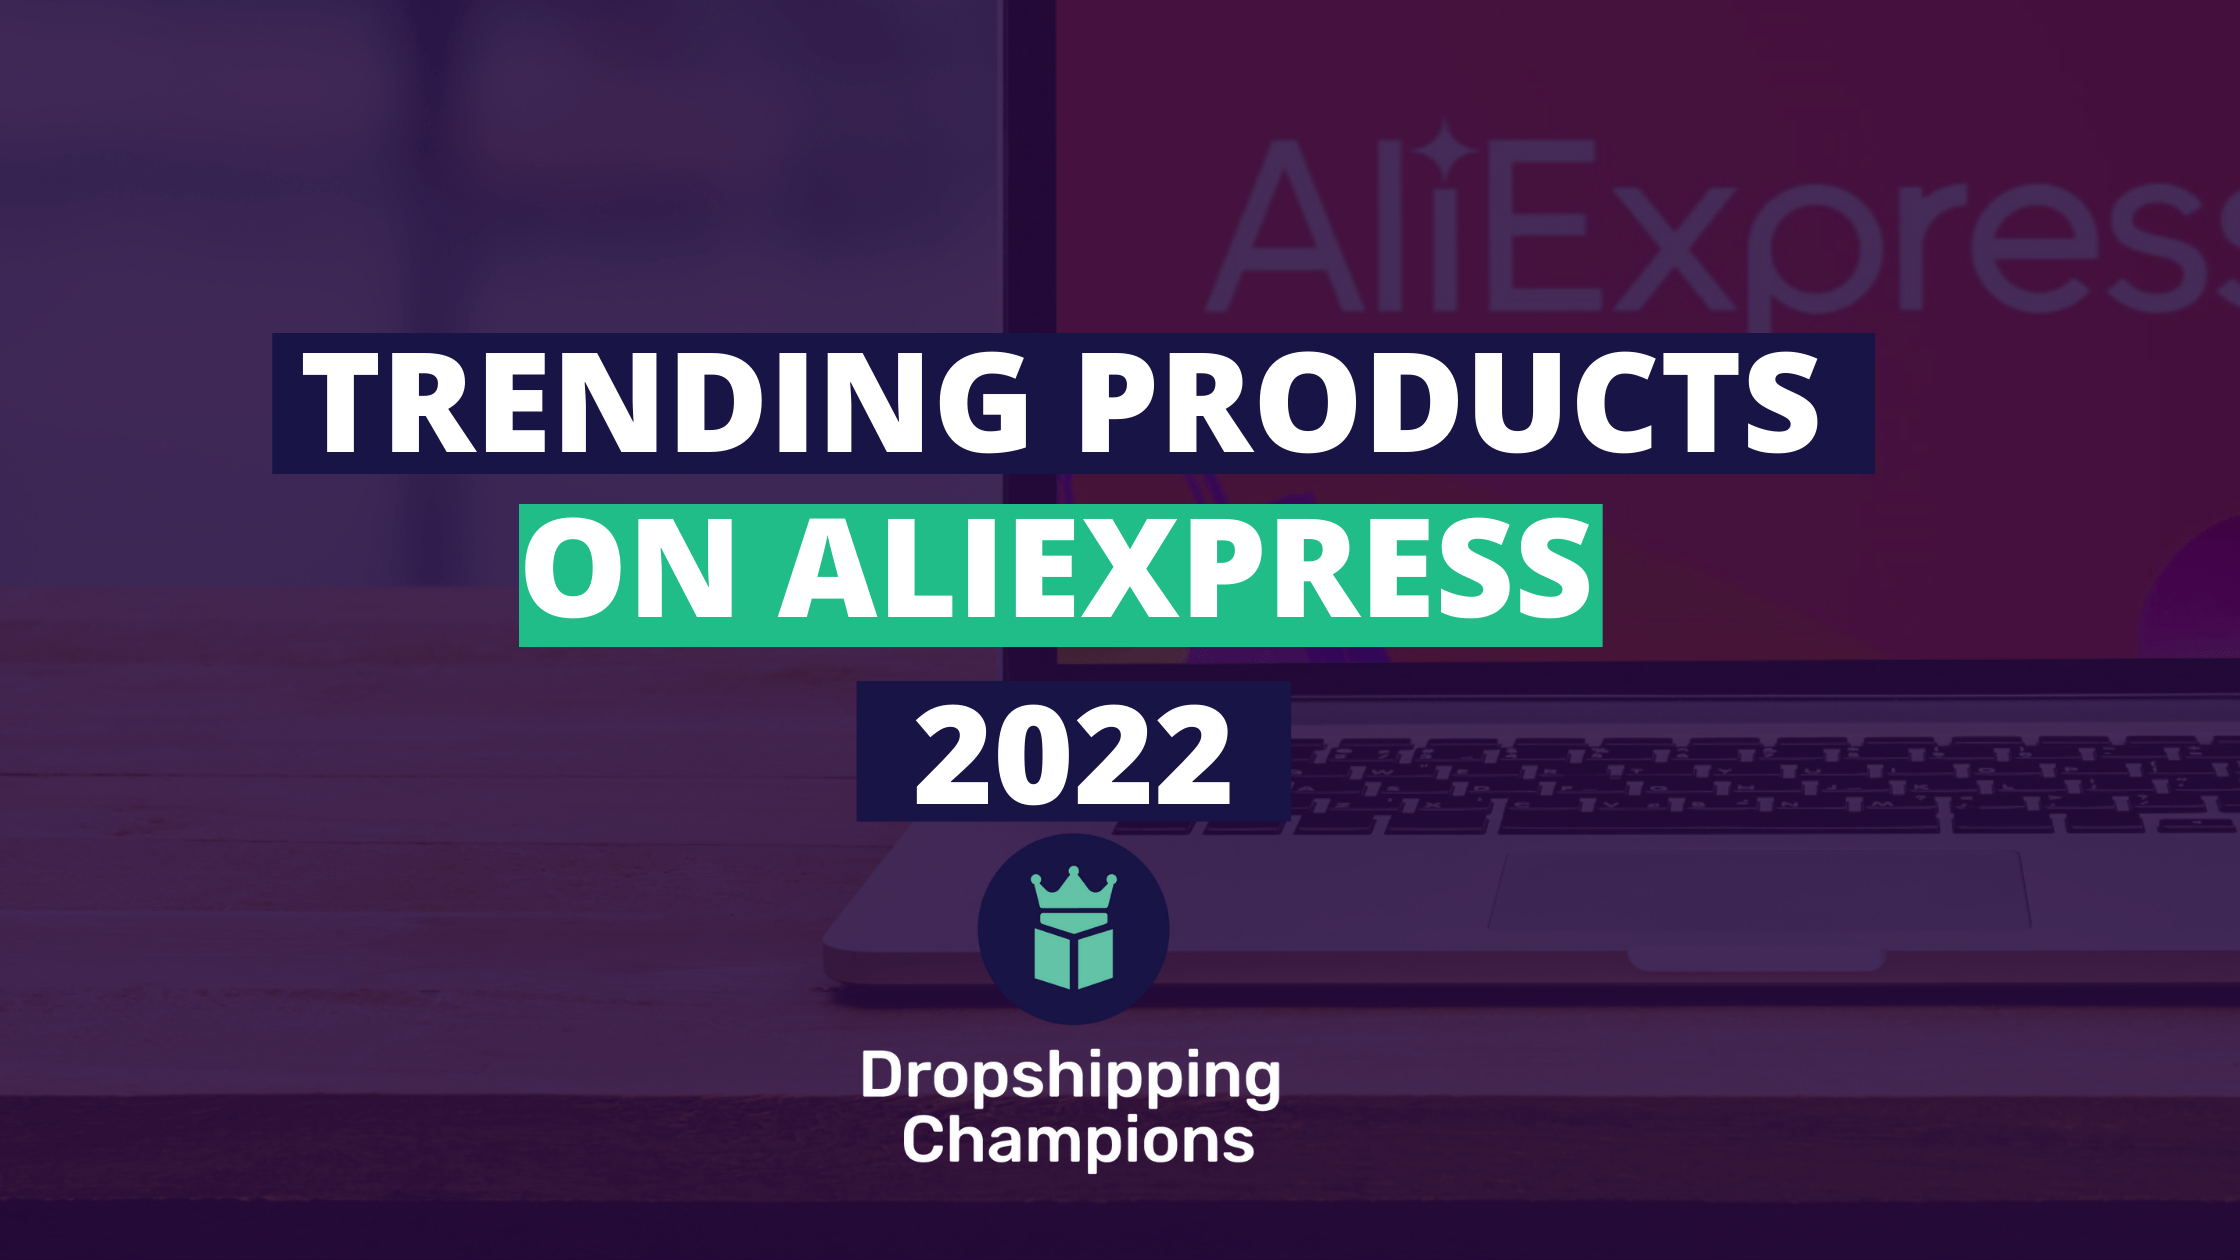 trending products aliexpress 2022